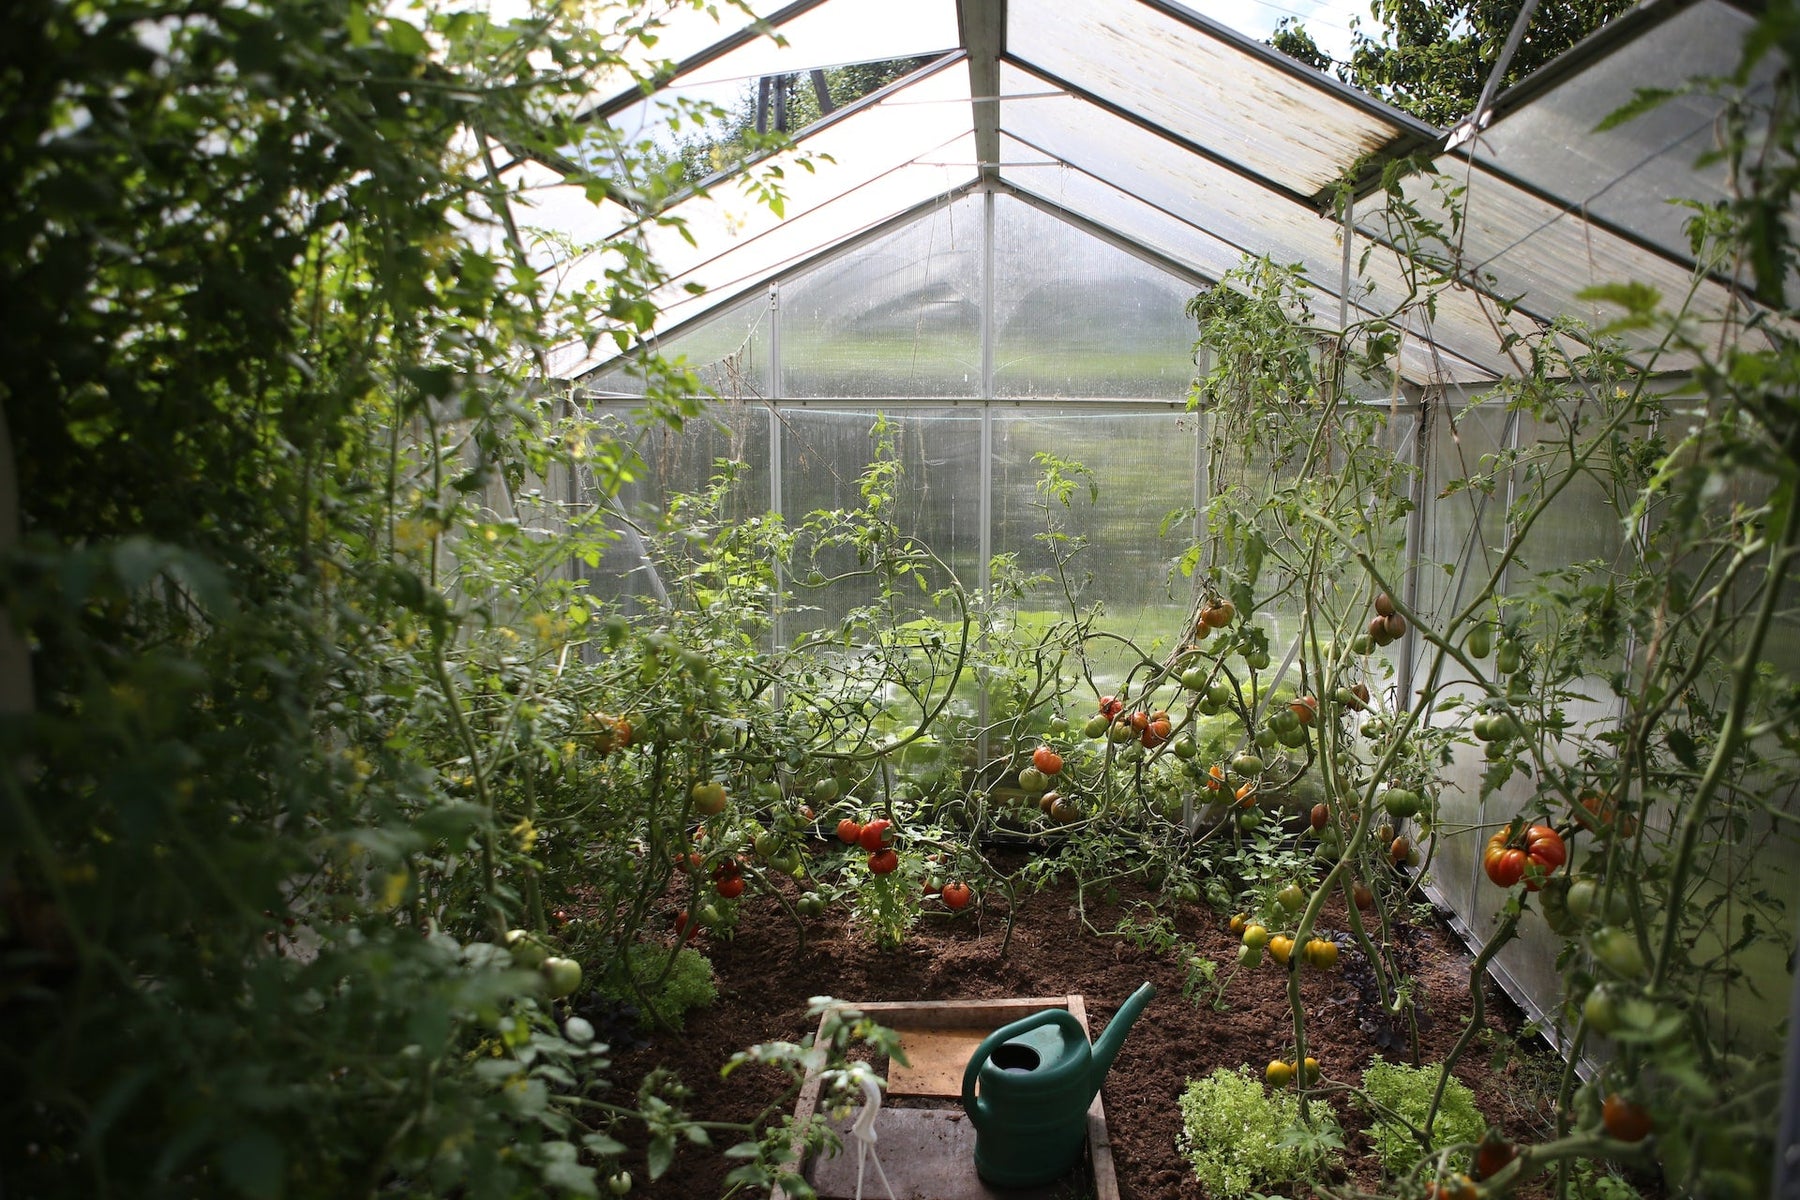 How An Unheated Greenhouse Can Help You Survive This Winter